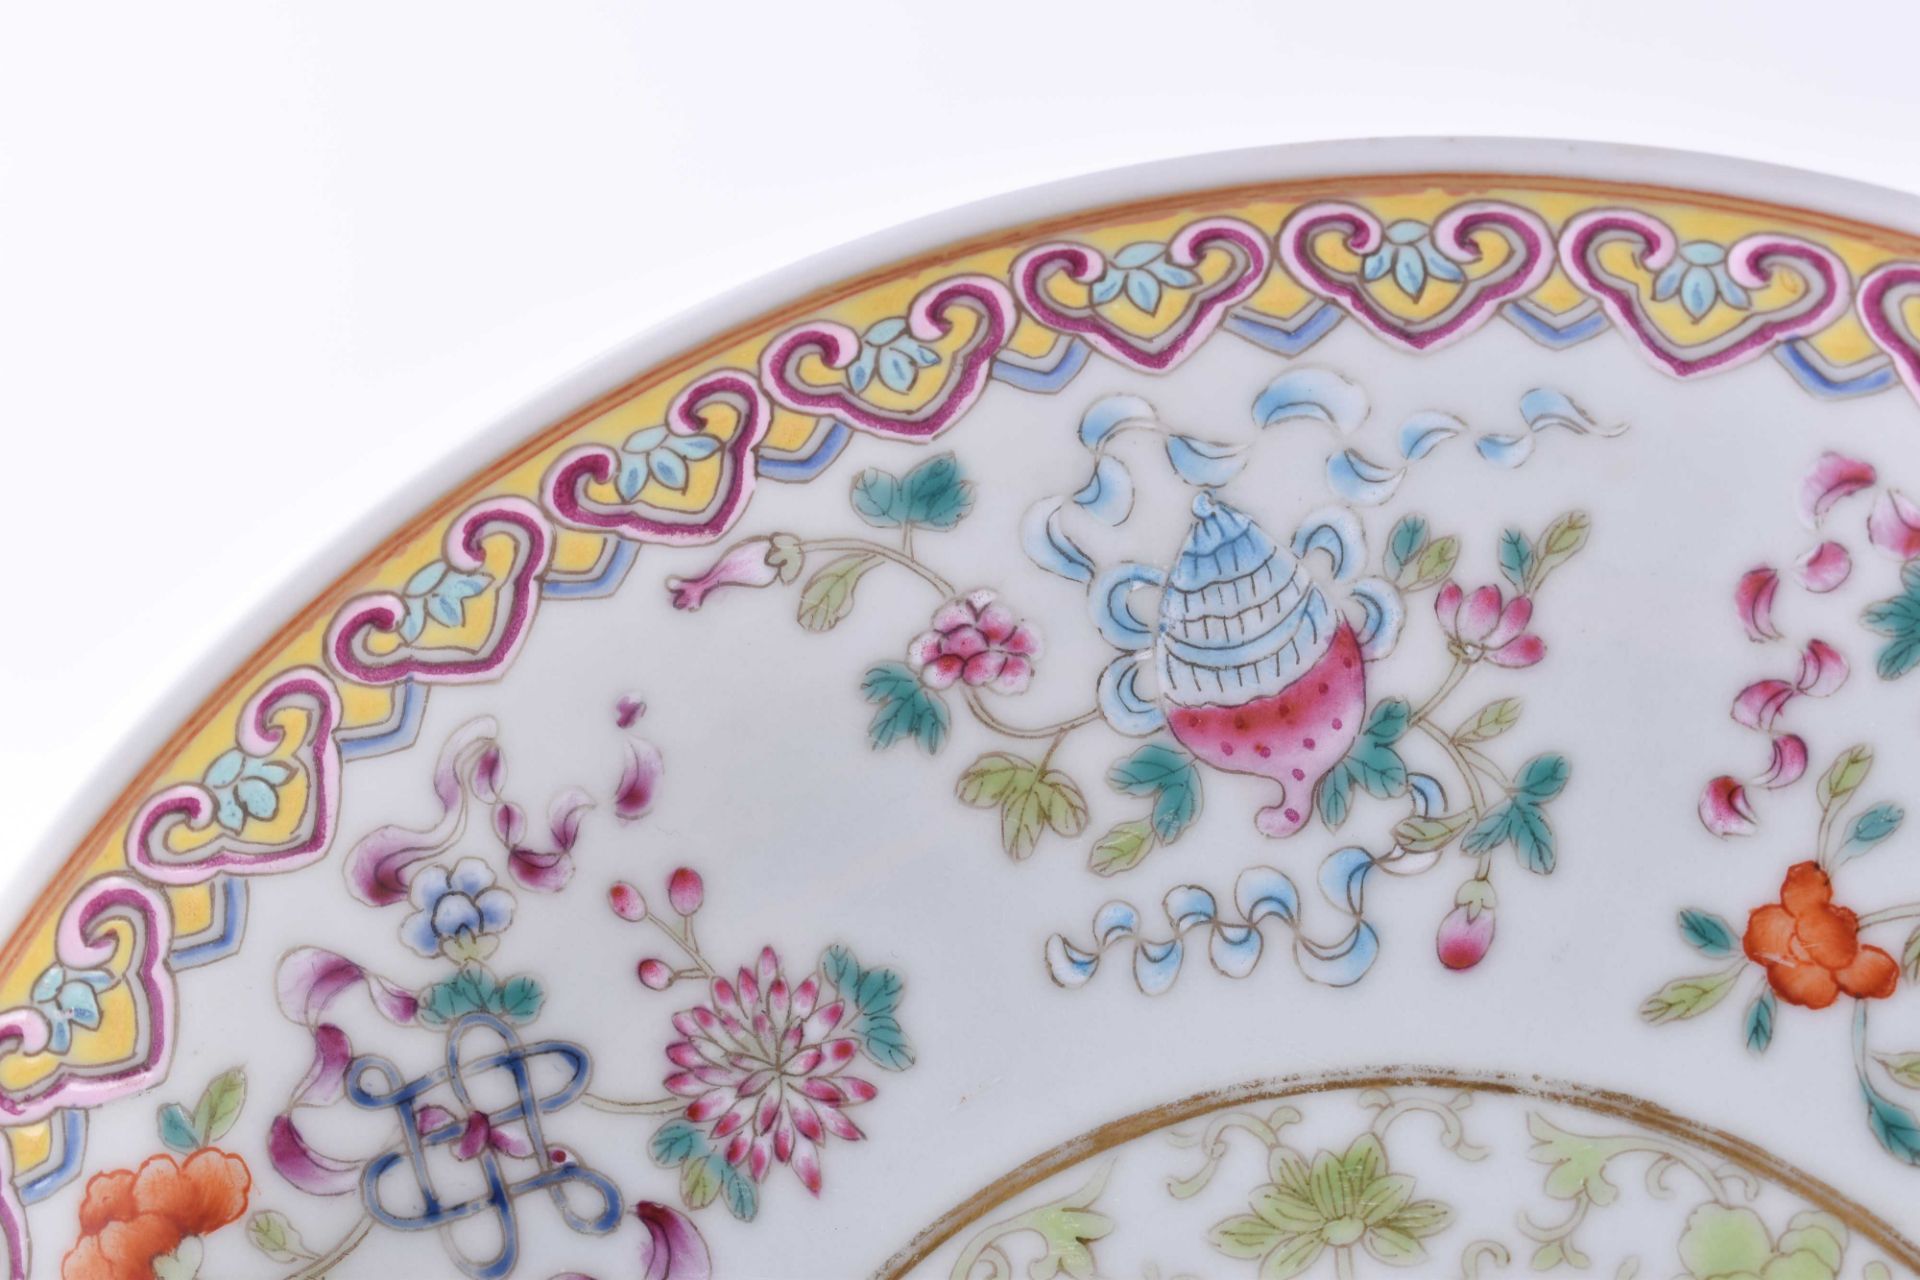 Famille Rose Plate China Qing-period 19th century - Image 2 of 2